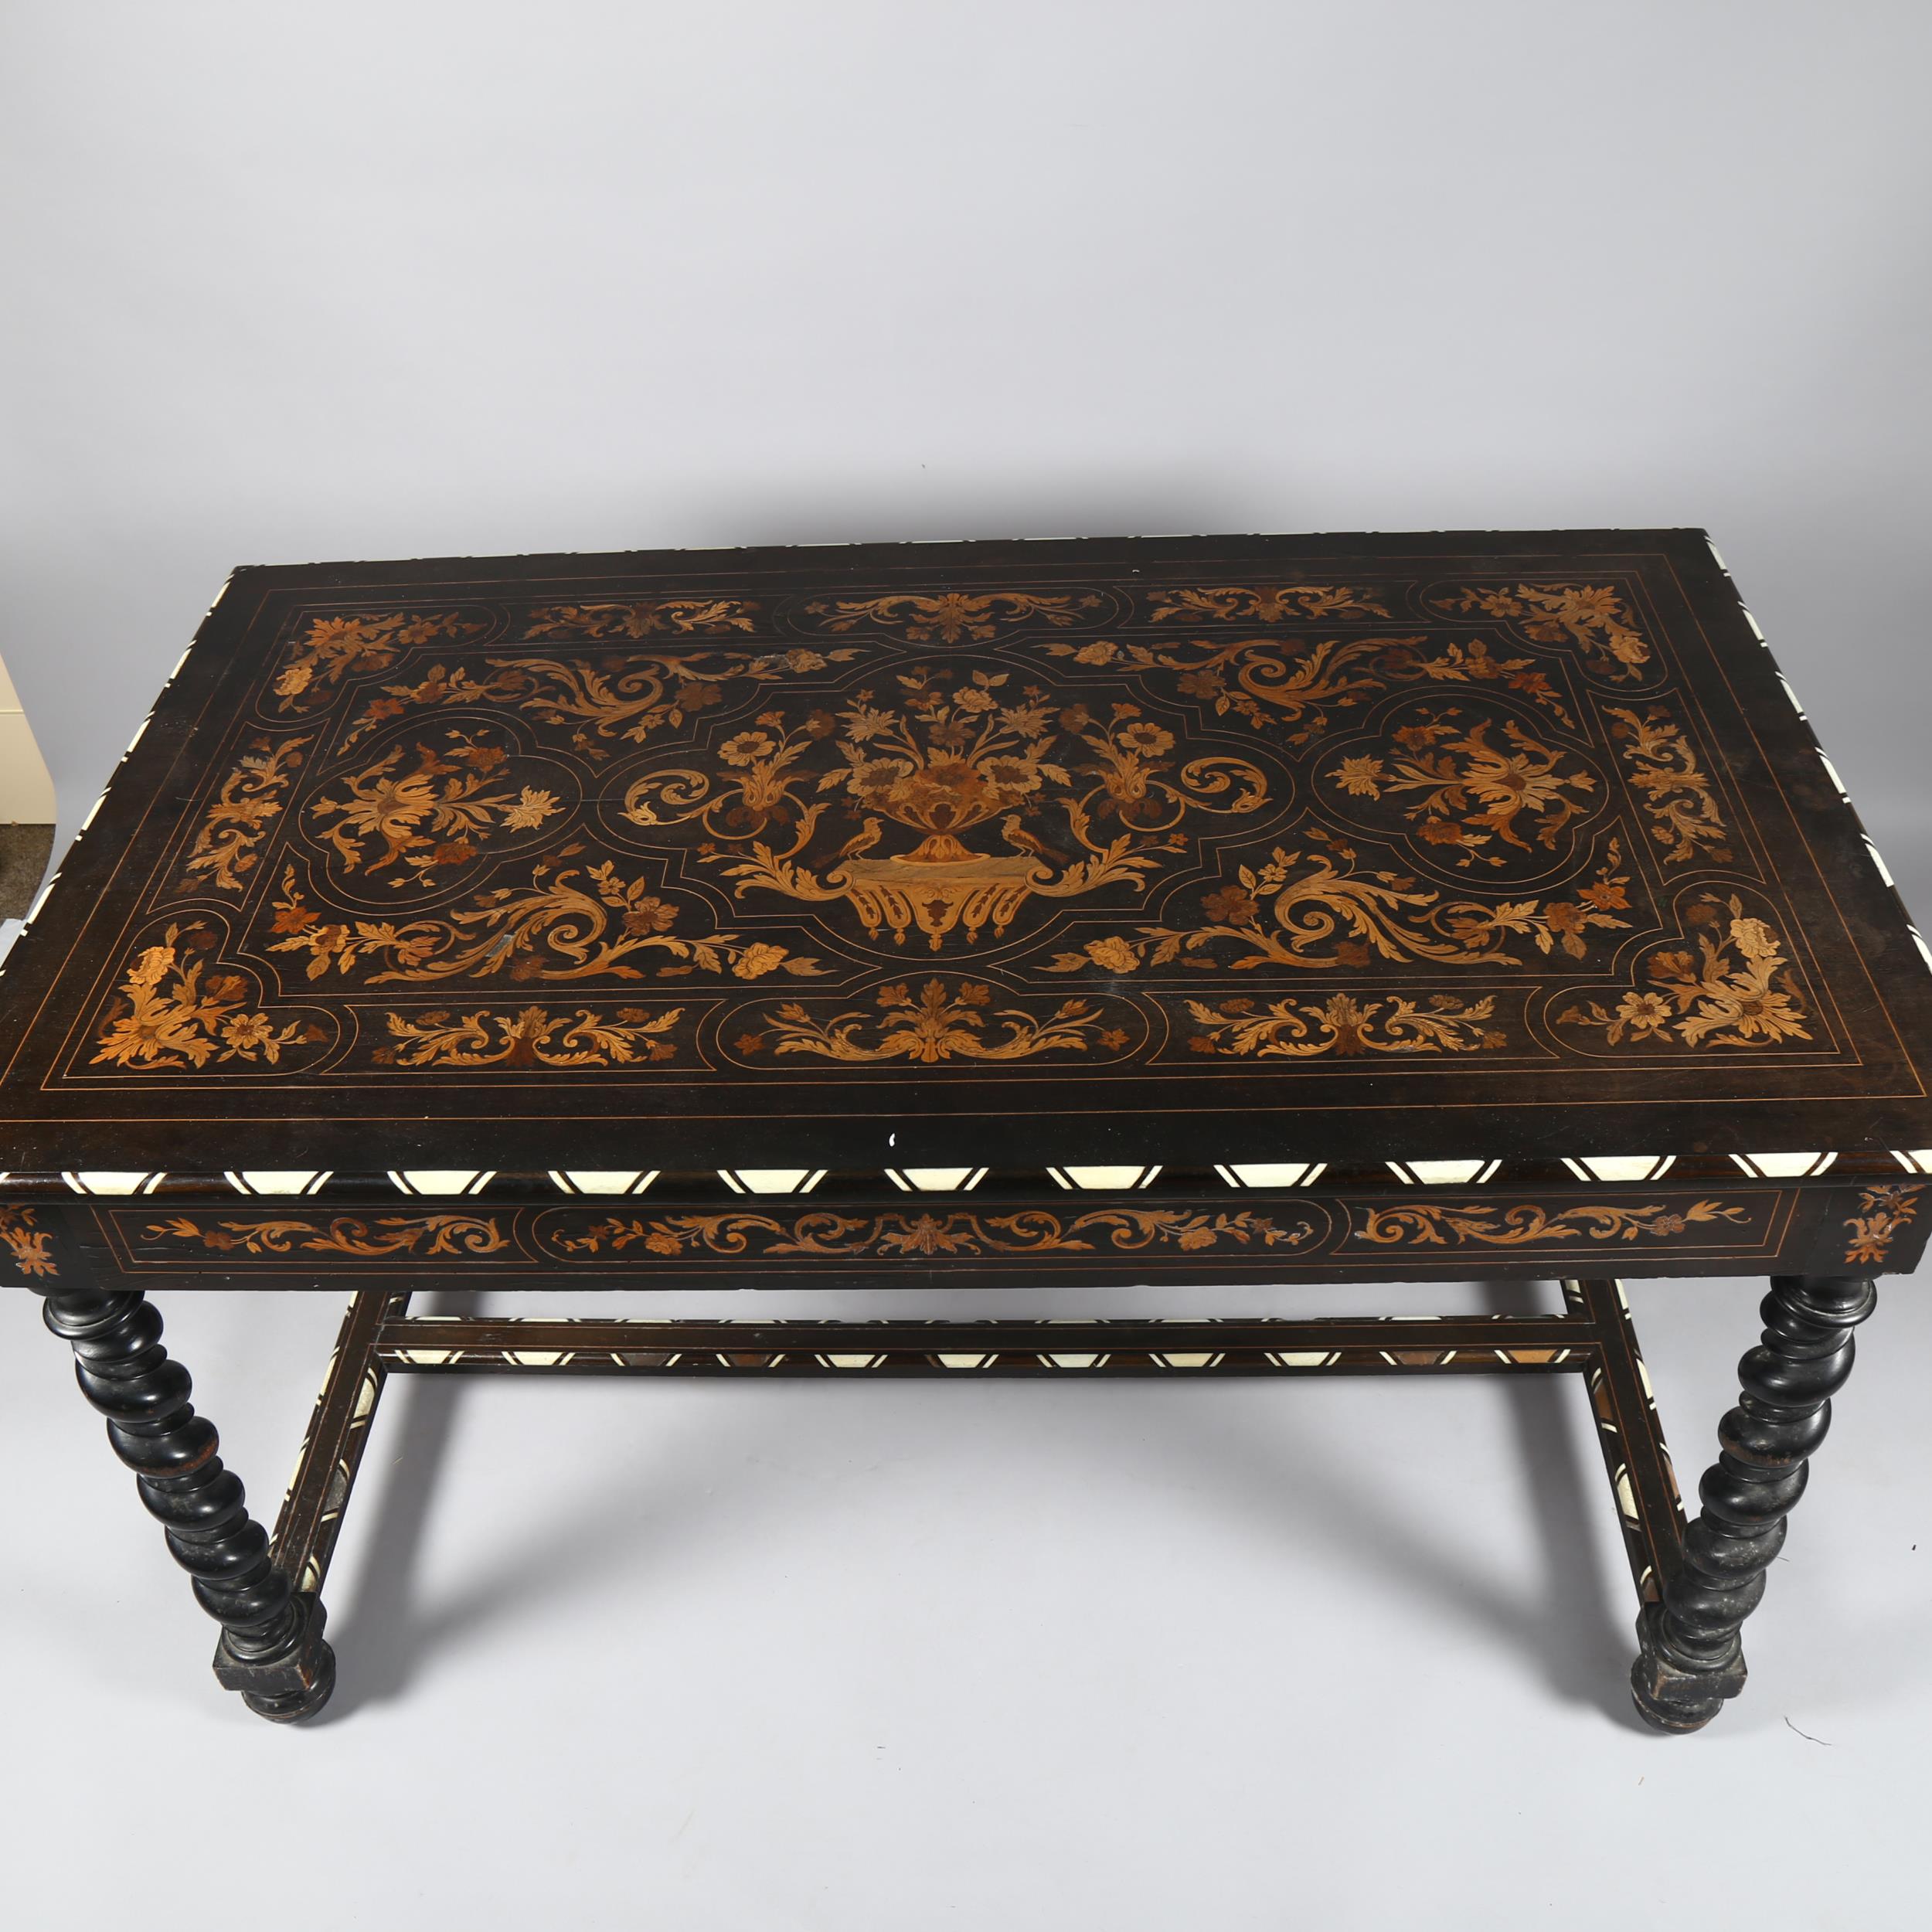 A 19th century Dutch marquetry centre table, rectangular form with bone inlaid edge, with - Image 2 of 10